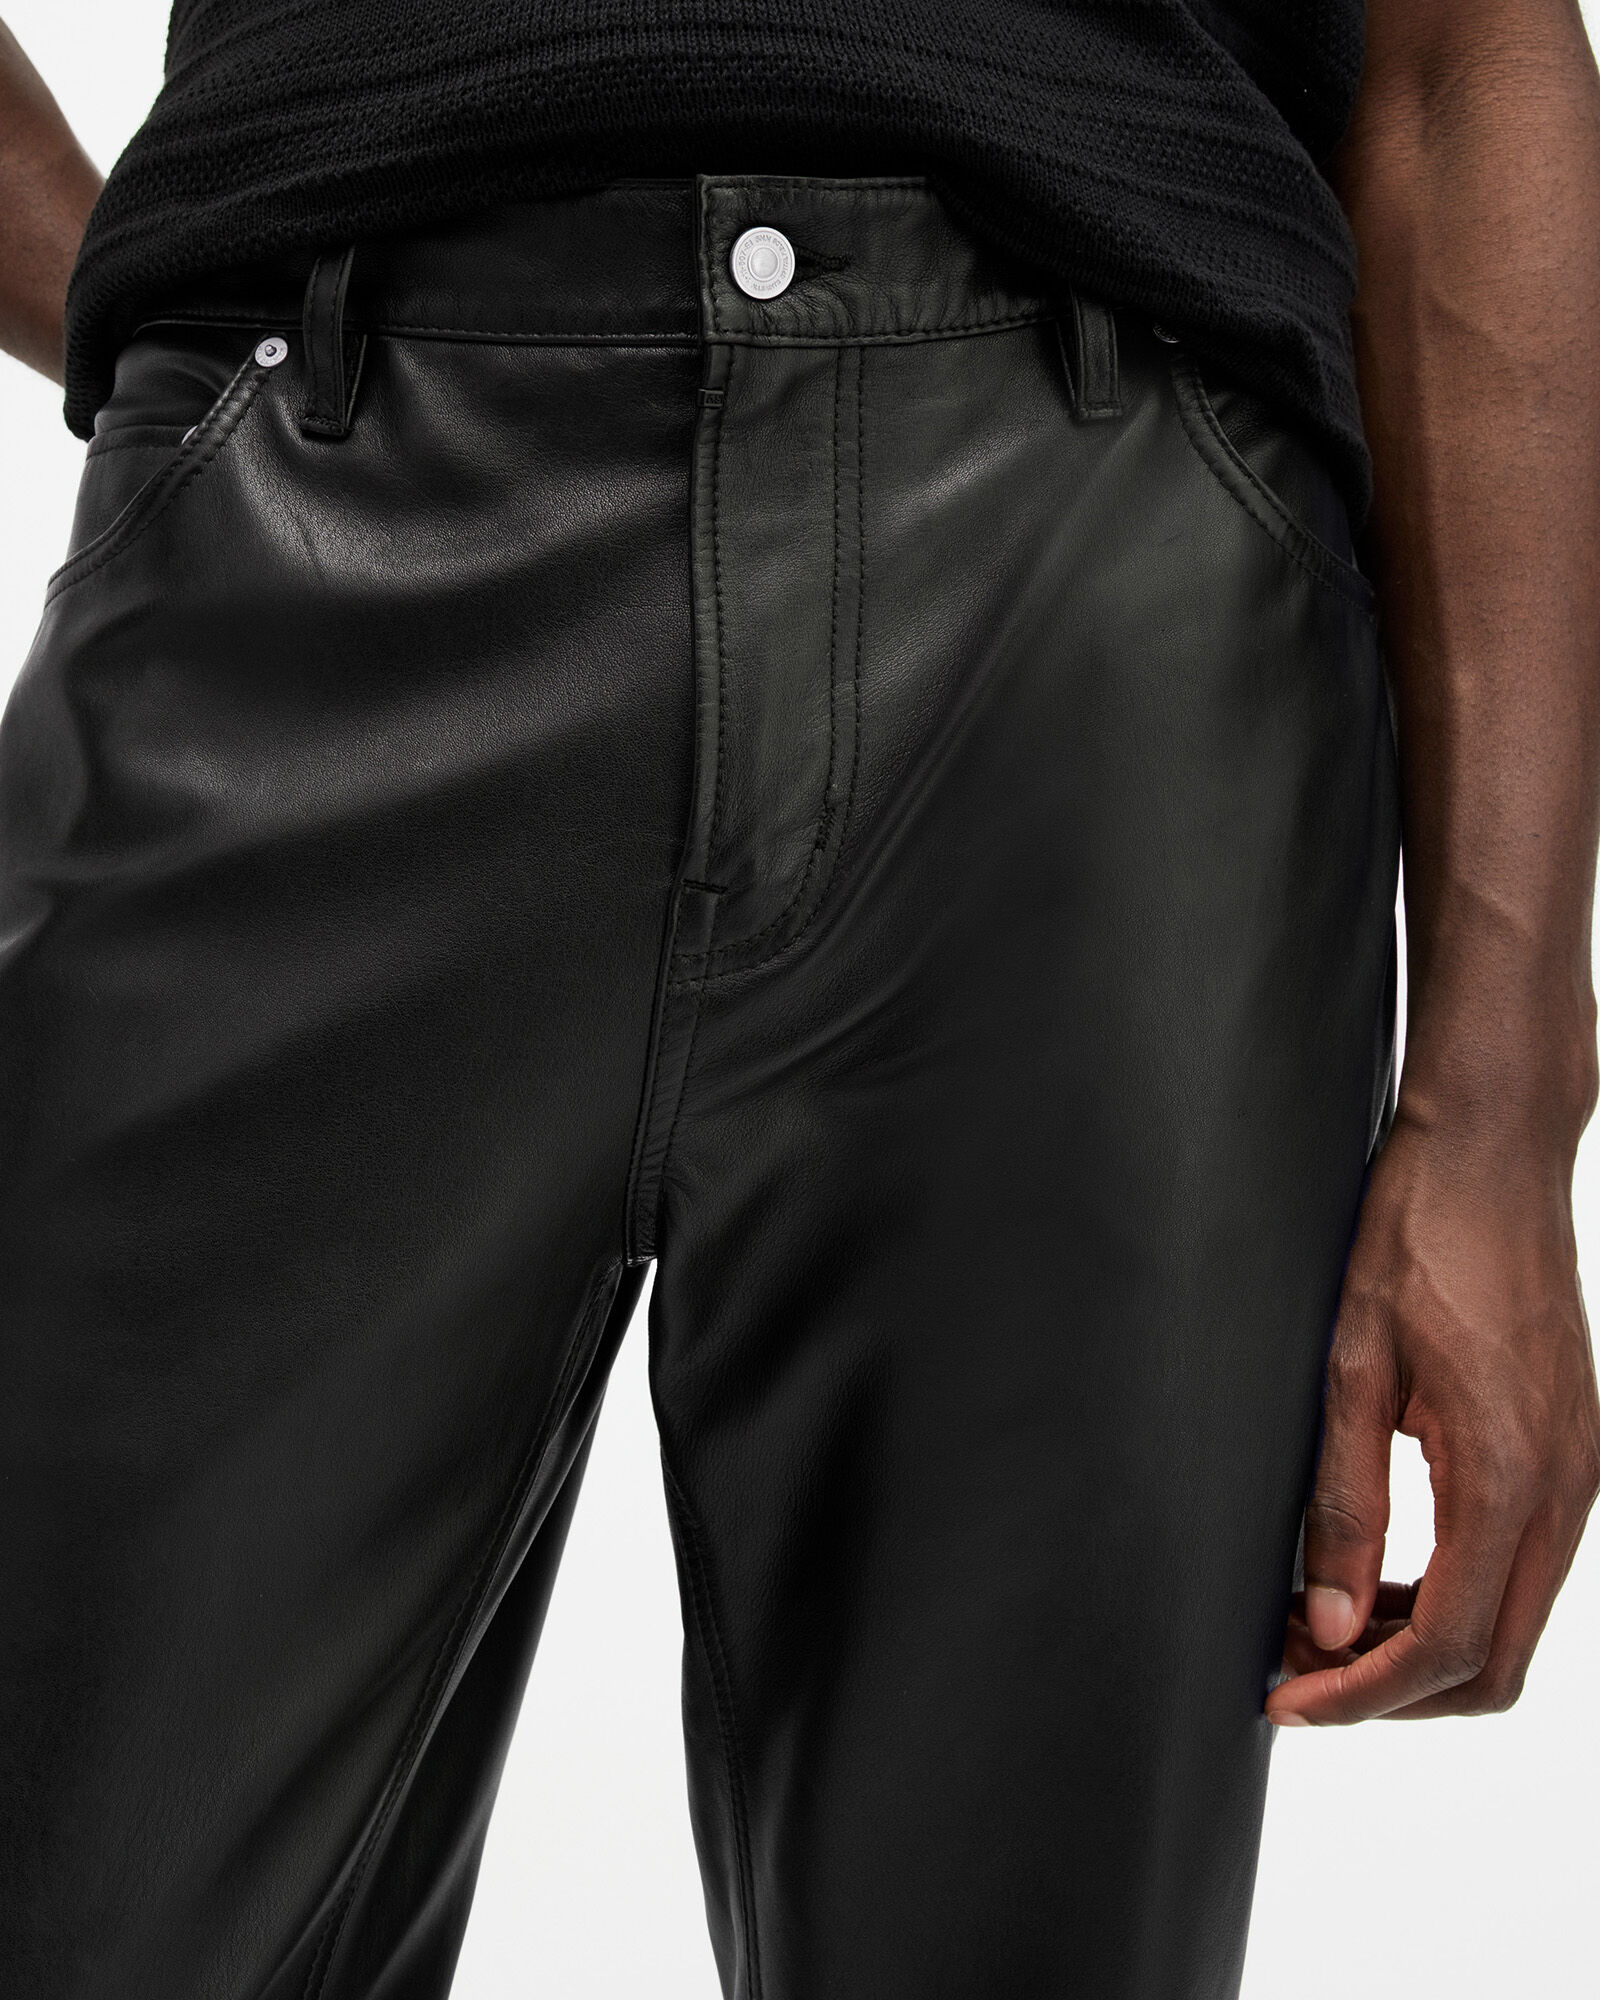 Freddy Ireland - Pants that give you the WOW factor!!! The Freddy High  Waist Leather pants are back in stock now, click link to see more. UK -  goo.gl/tjSu45 Ireland - goo.gl/zoFM8P |